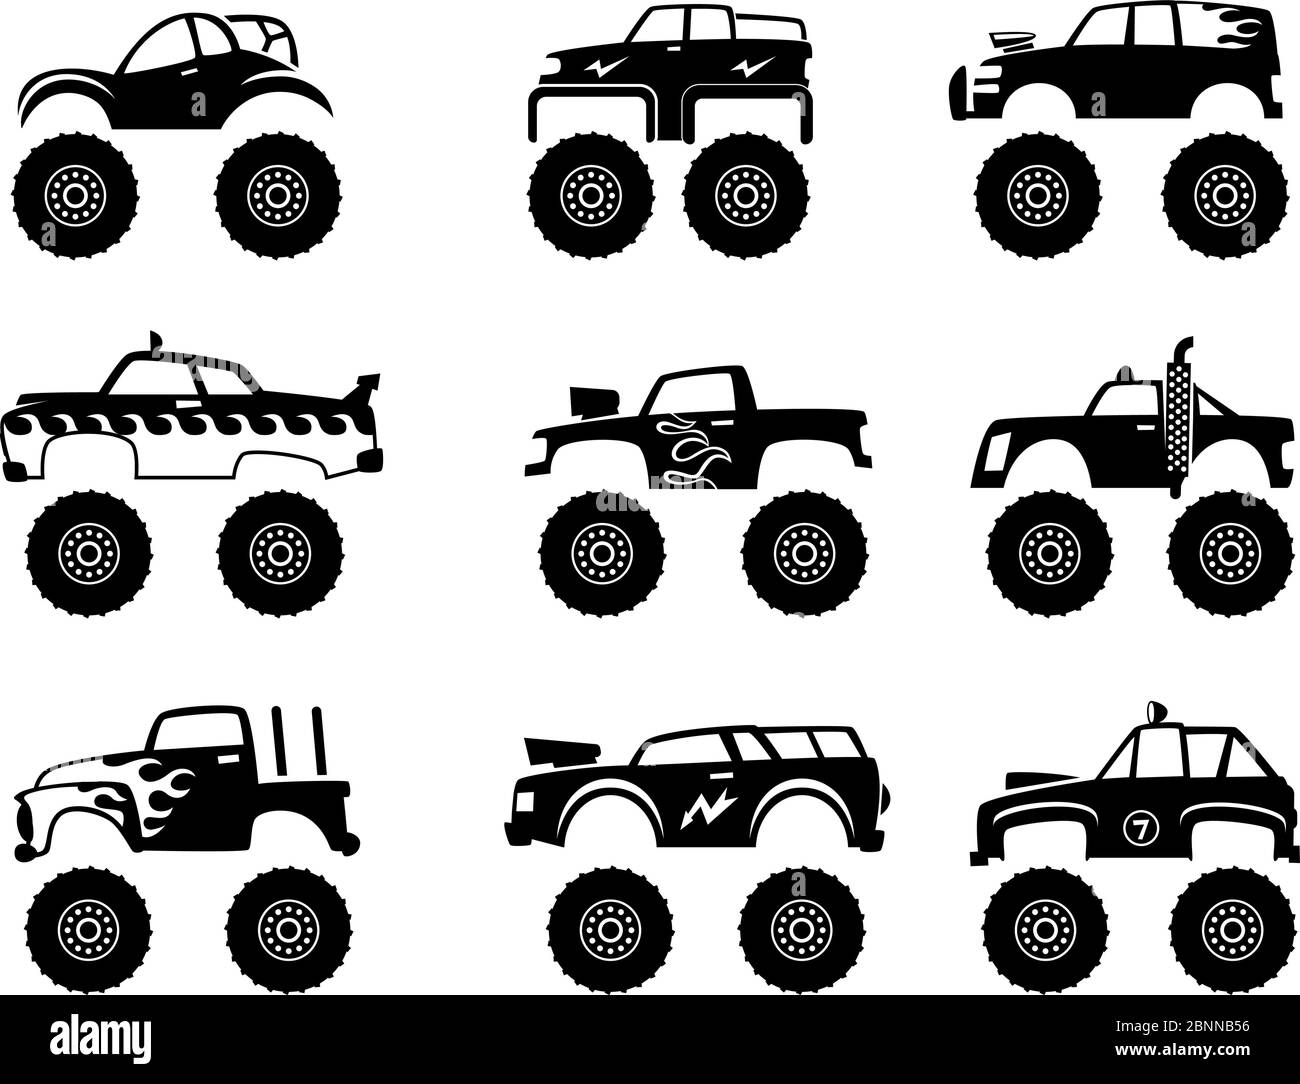 Monster truck automobile. Big tires and wheels off road cartoon car toy for kids vector monochrome black illustrations isolated Stock Vector